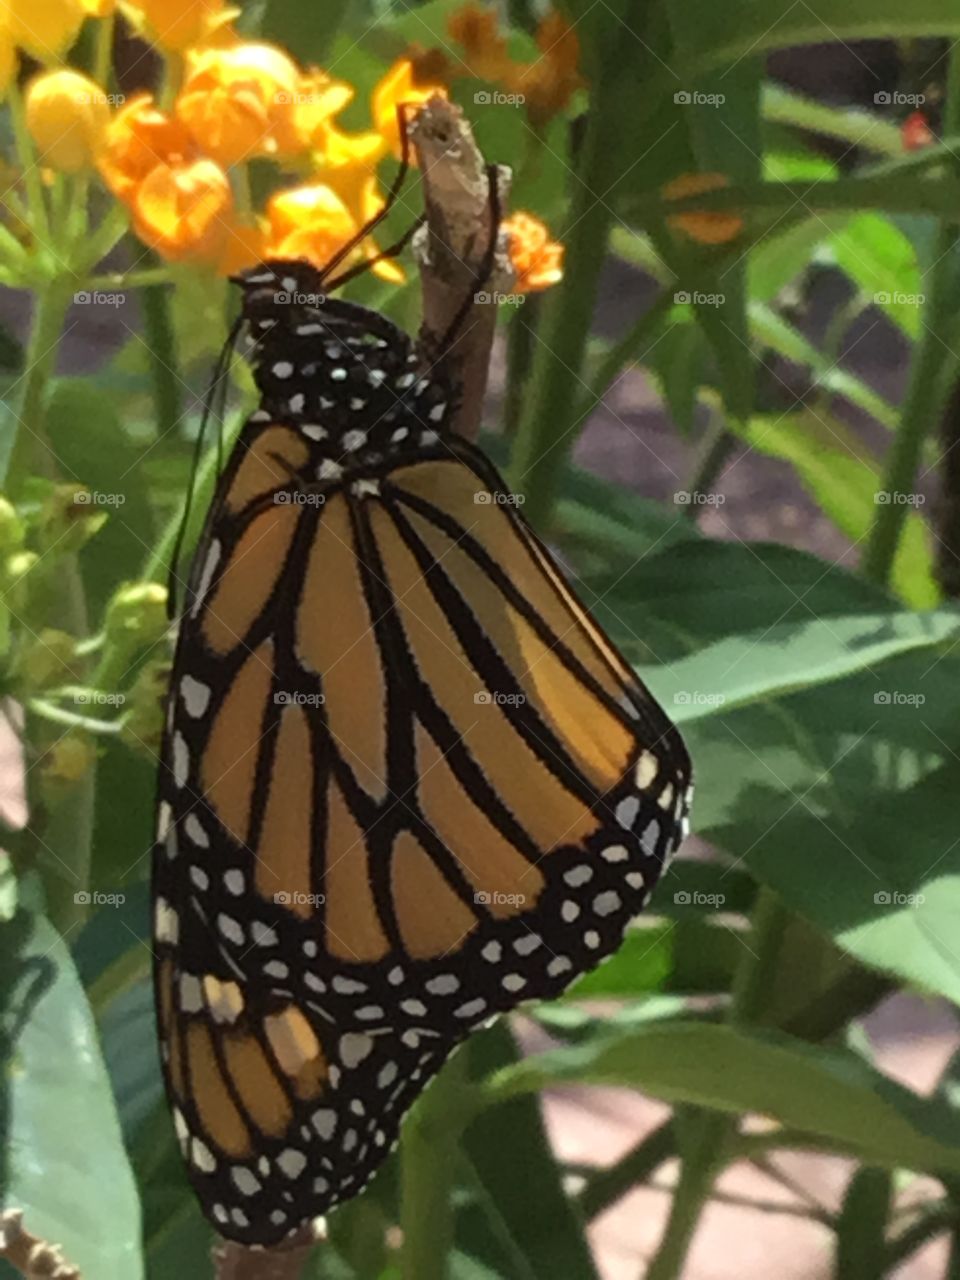 Monarch butterfly who just emerged from its cocoon drying its wings before flying...